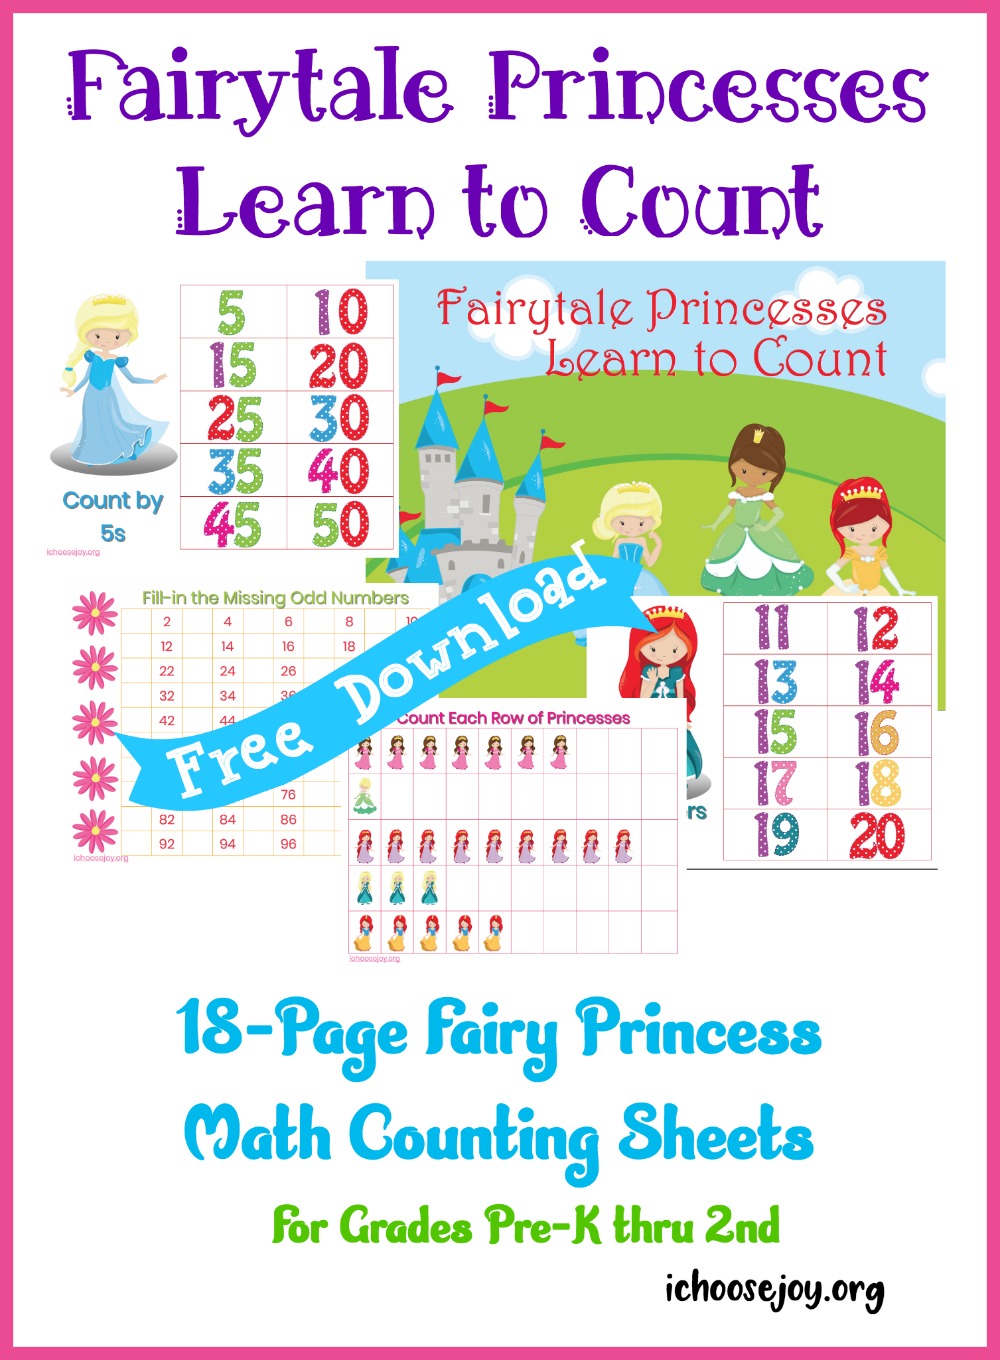 Fairy Princess Math Counting Sheets, 18-page printable pack free download for grades Pre-K thru 2nd